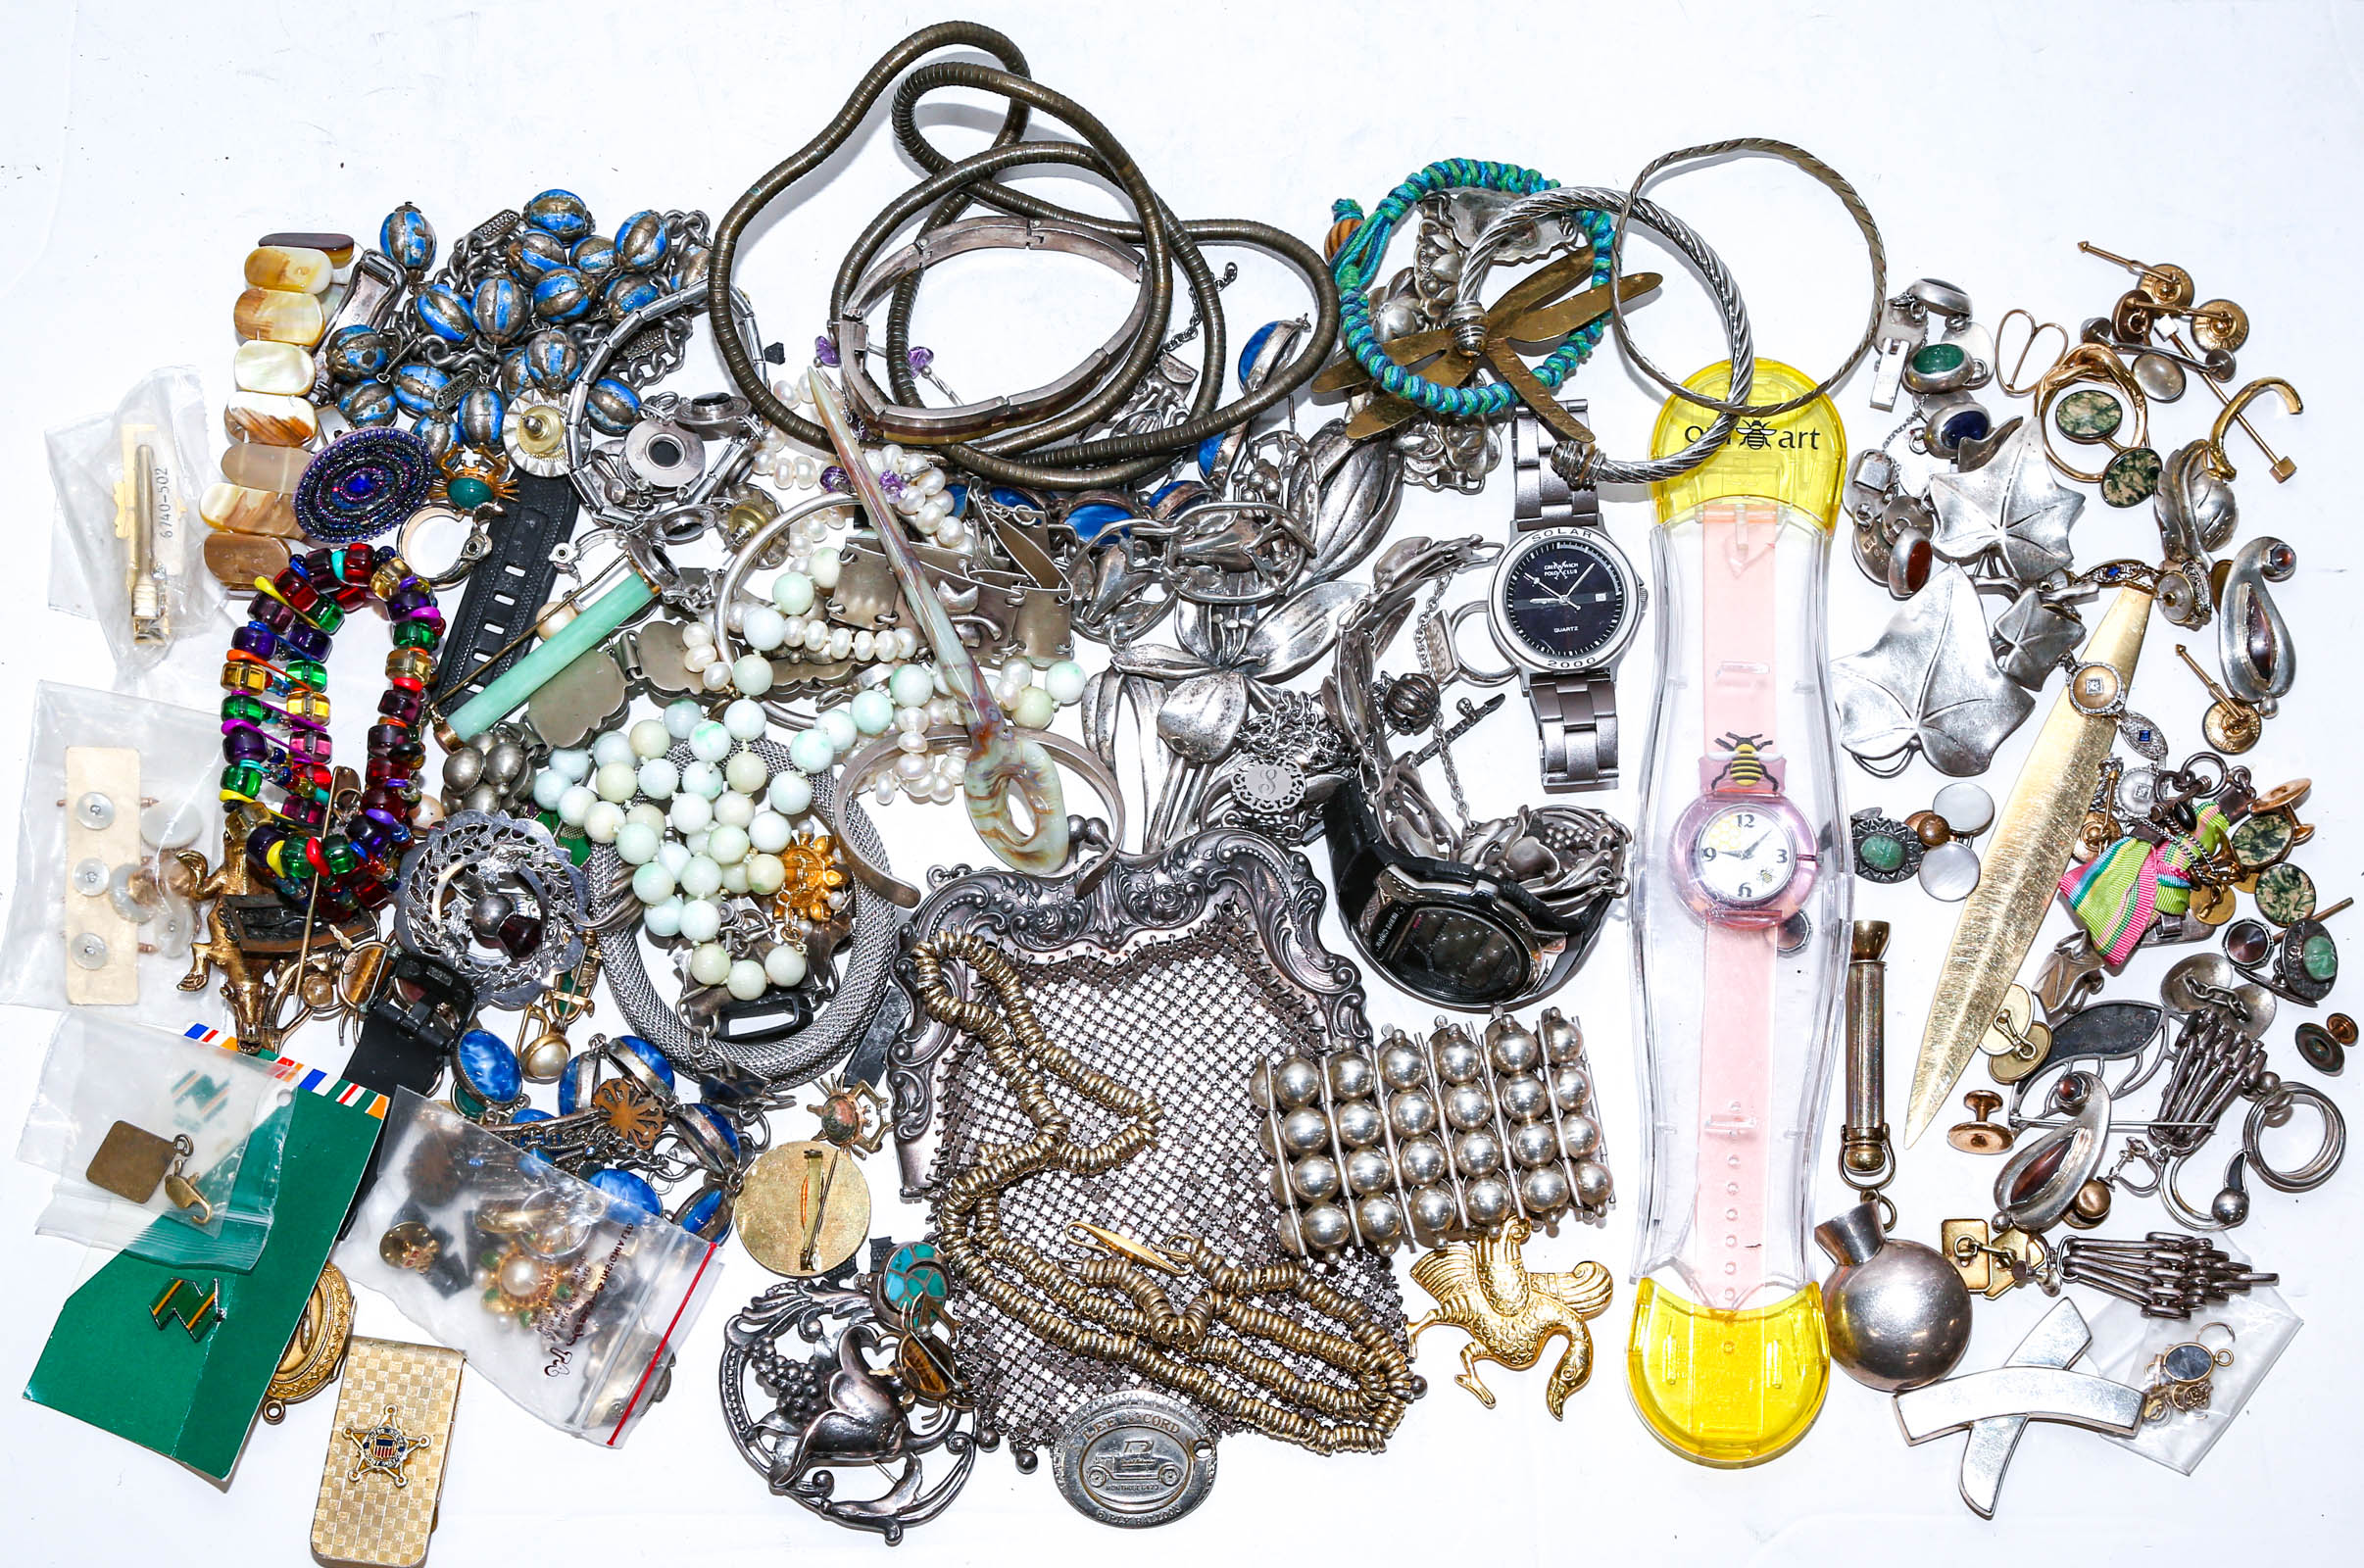 A LARGE COLLECTION OF VINTAGE JEWELRY